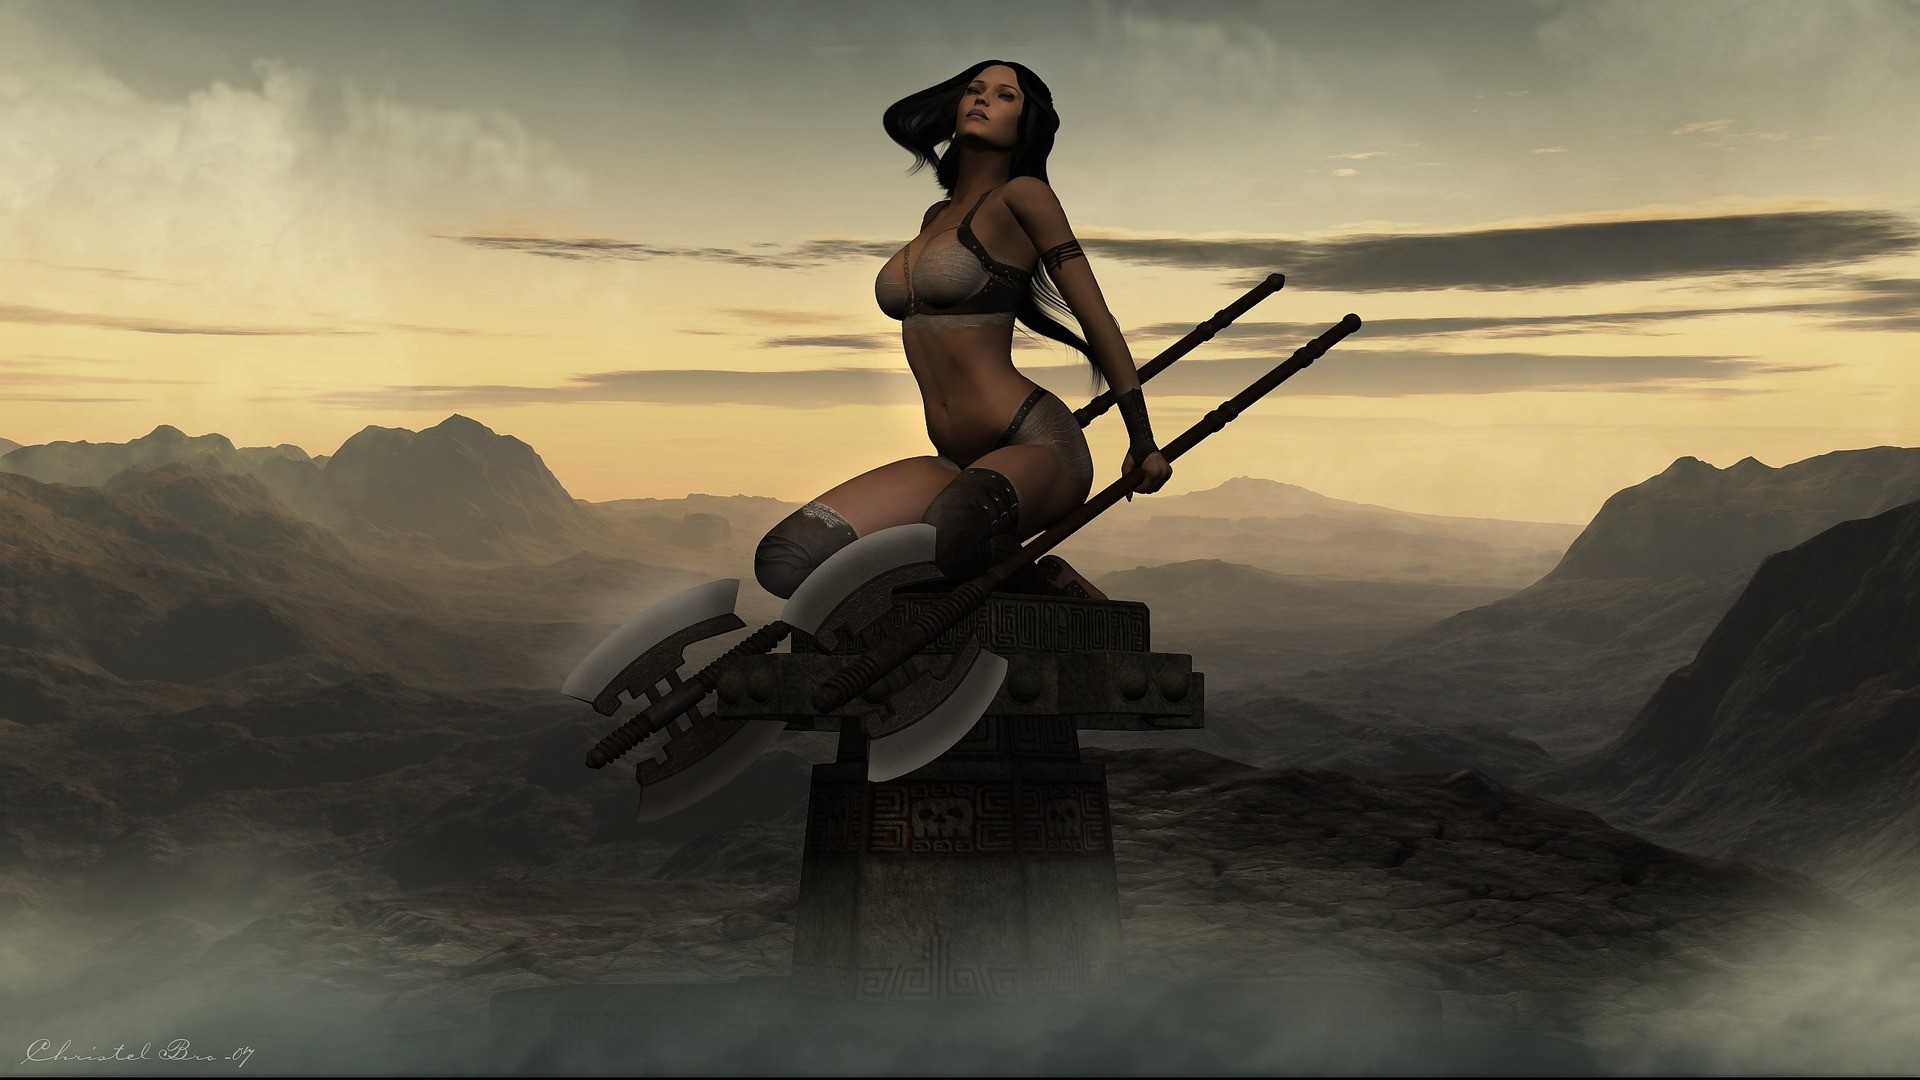 1920x1080 1136 Women Warrior HD Wallpapers | Backgrounds - Wallpaper Abyss - Page 10